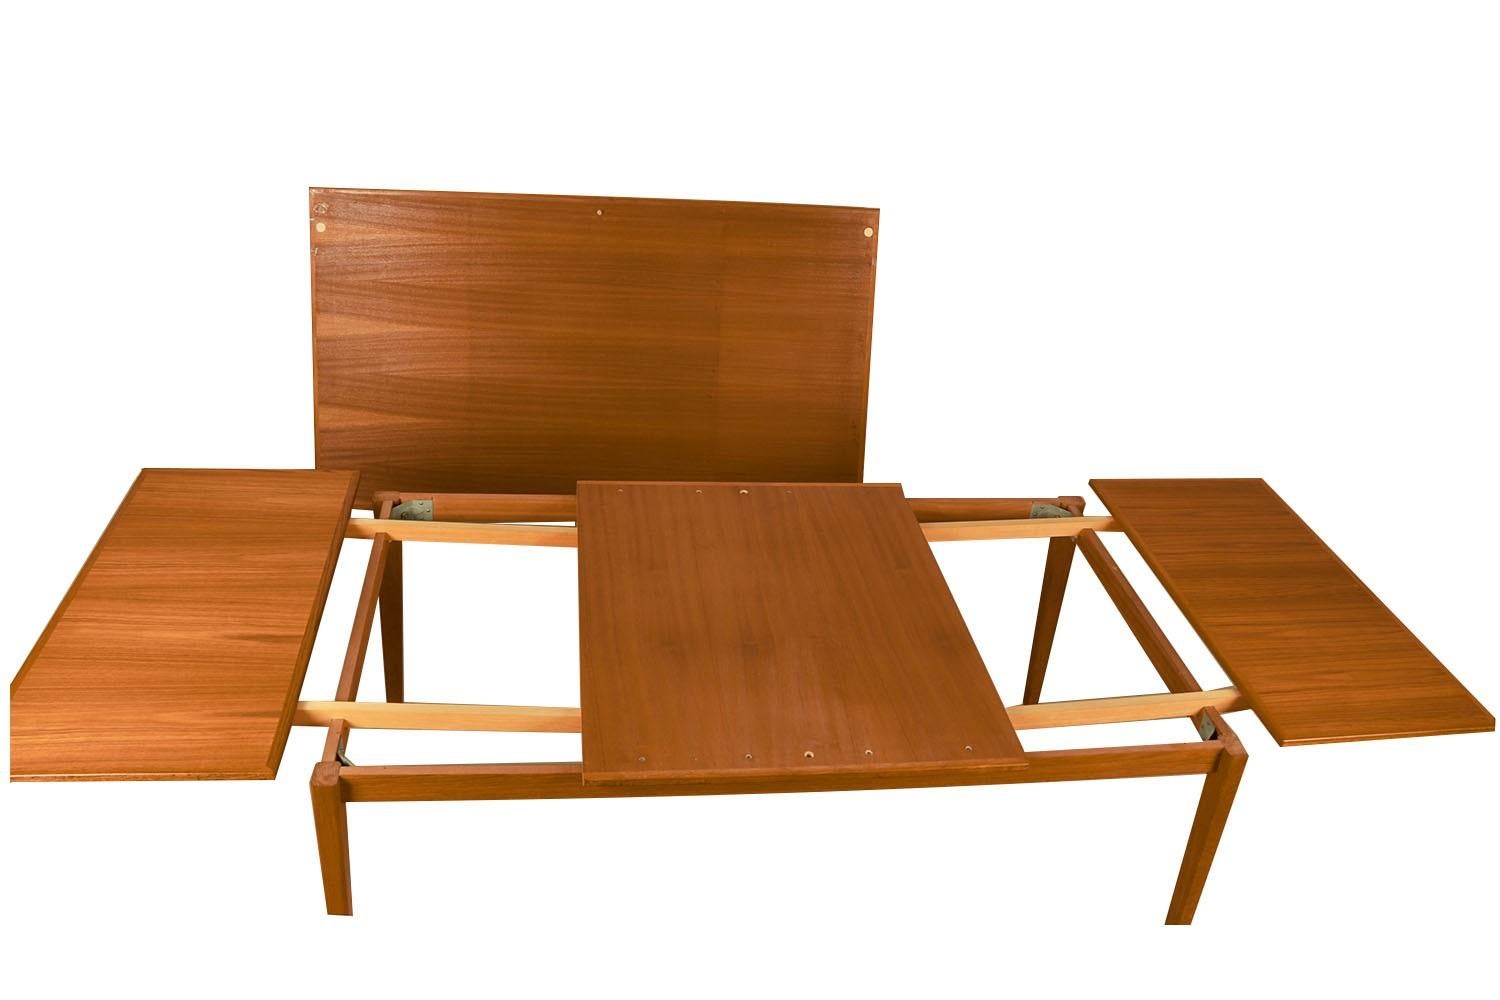 An exceptional, Danish, Modern, teak draw leaf Expandable dining table, by Willy Sigh for H. Sigh and Sons Mobelfabrik, Denmark 1960s. With an initial large footprint, this table can also offer a generous space and double in size once its hidden